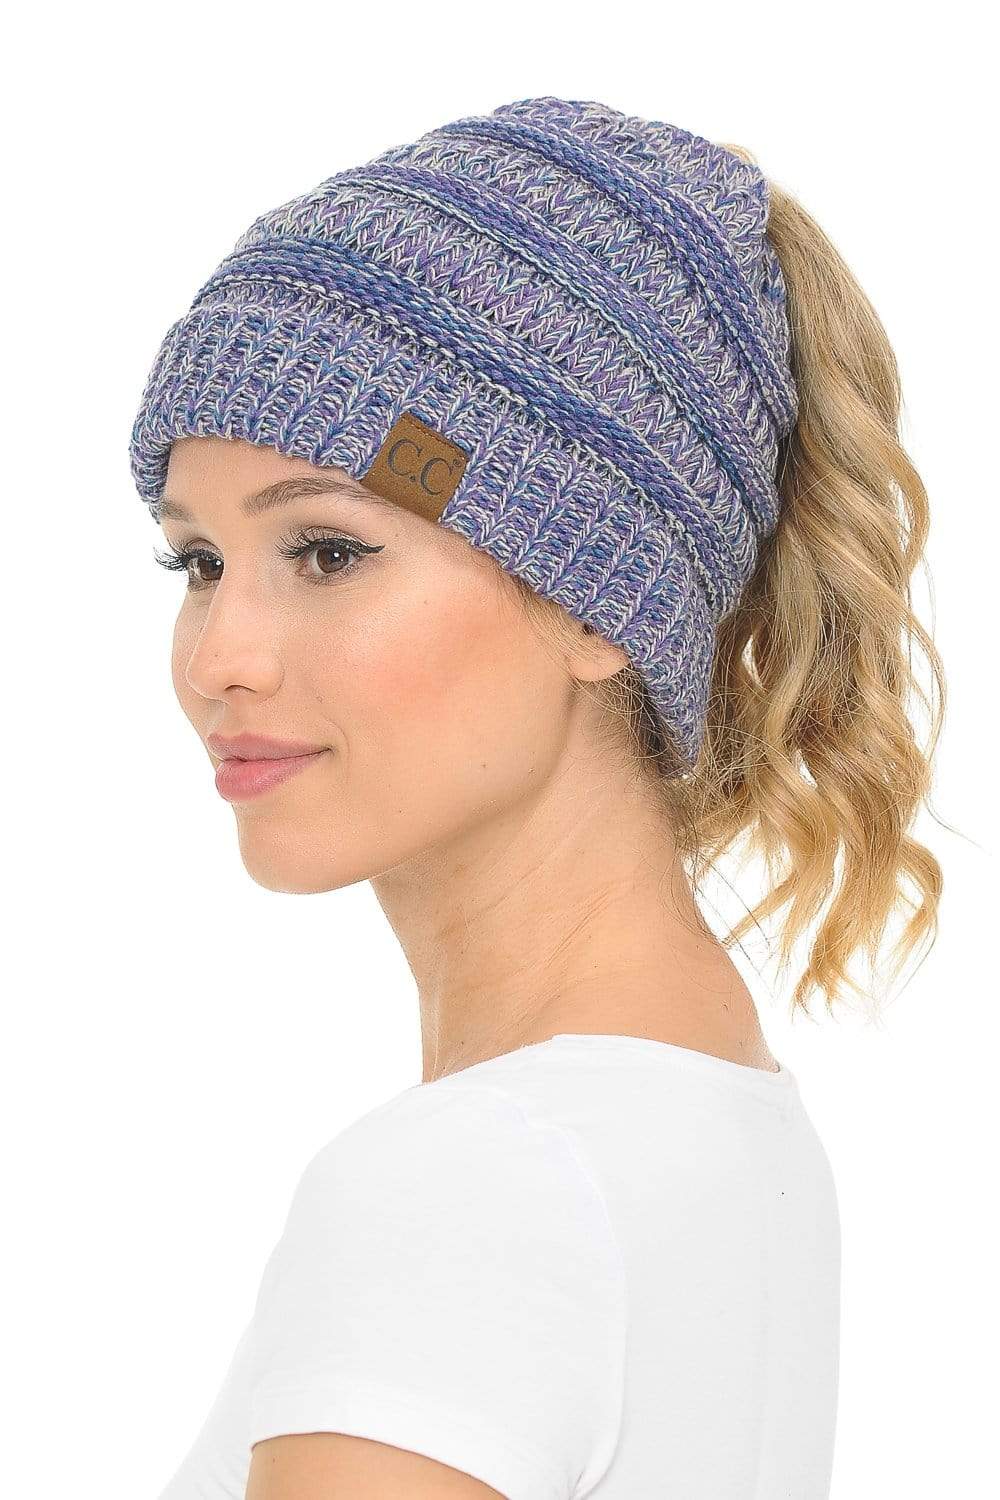 C.C Apparel Blue Purple Gray (#2) C.C MB816 - Soft Stretch Cable Knit Warm Ponytail Hat 4 Toned Mixed Multi Color Beanie